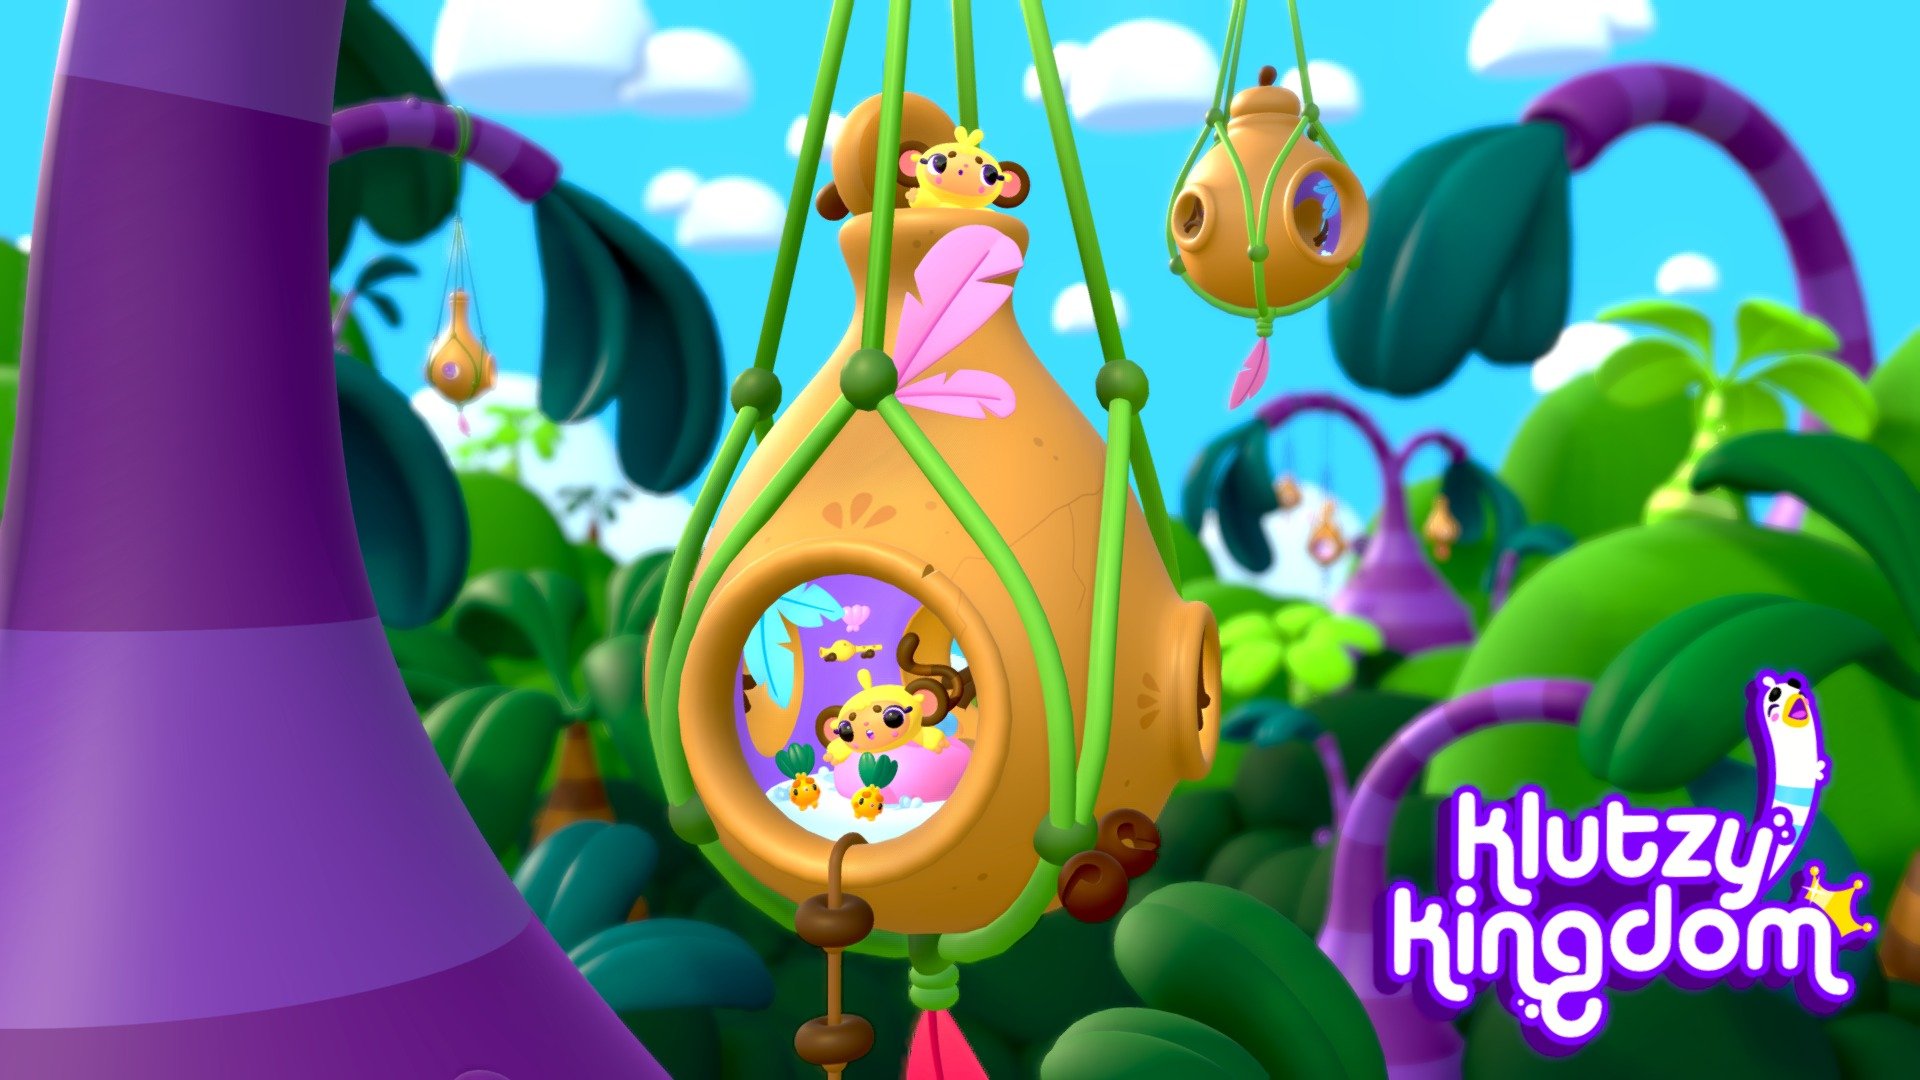 Look at those little monkey houses hanging in the trees!! These little monkeys have several predators in the jungle and prefer to live high up. 🐵💜

This is a scene from my project Klutzy Kingdom! Chek out this link to see the original post and follow me for more cute stuff!
https://www.instagram.com/p/CnAJgJlp41Z/ - Klutzy Kingdom - Monkey treehouse! - 3D model by L3X 3d model